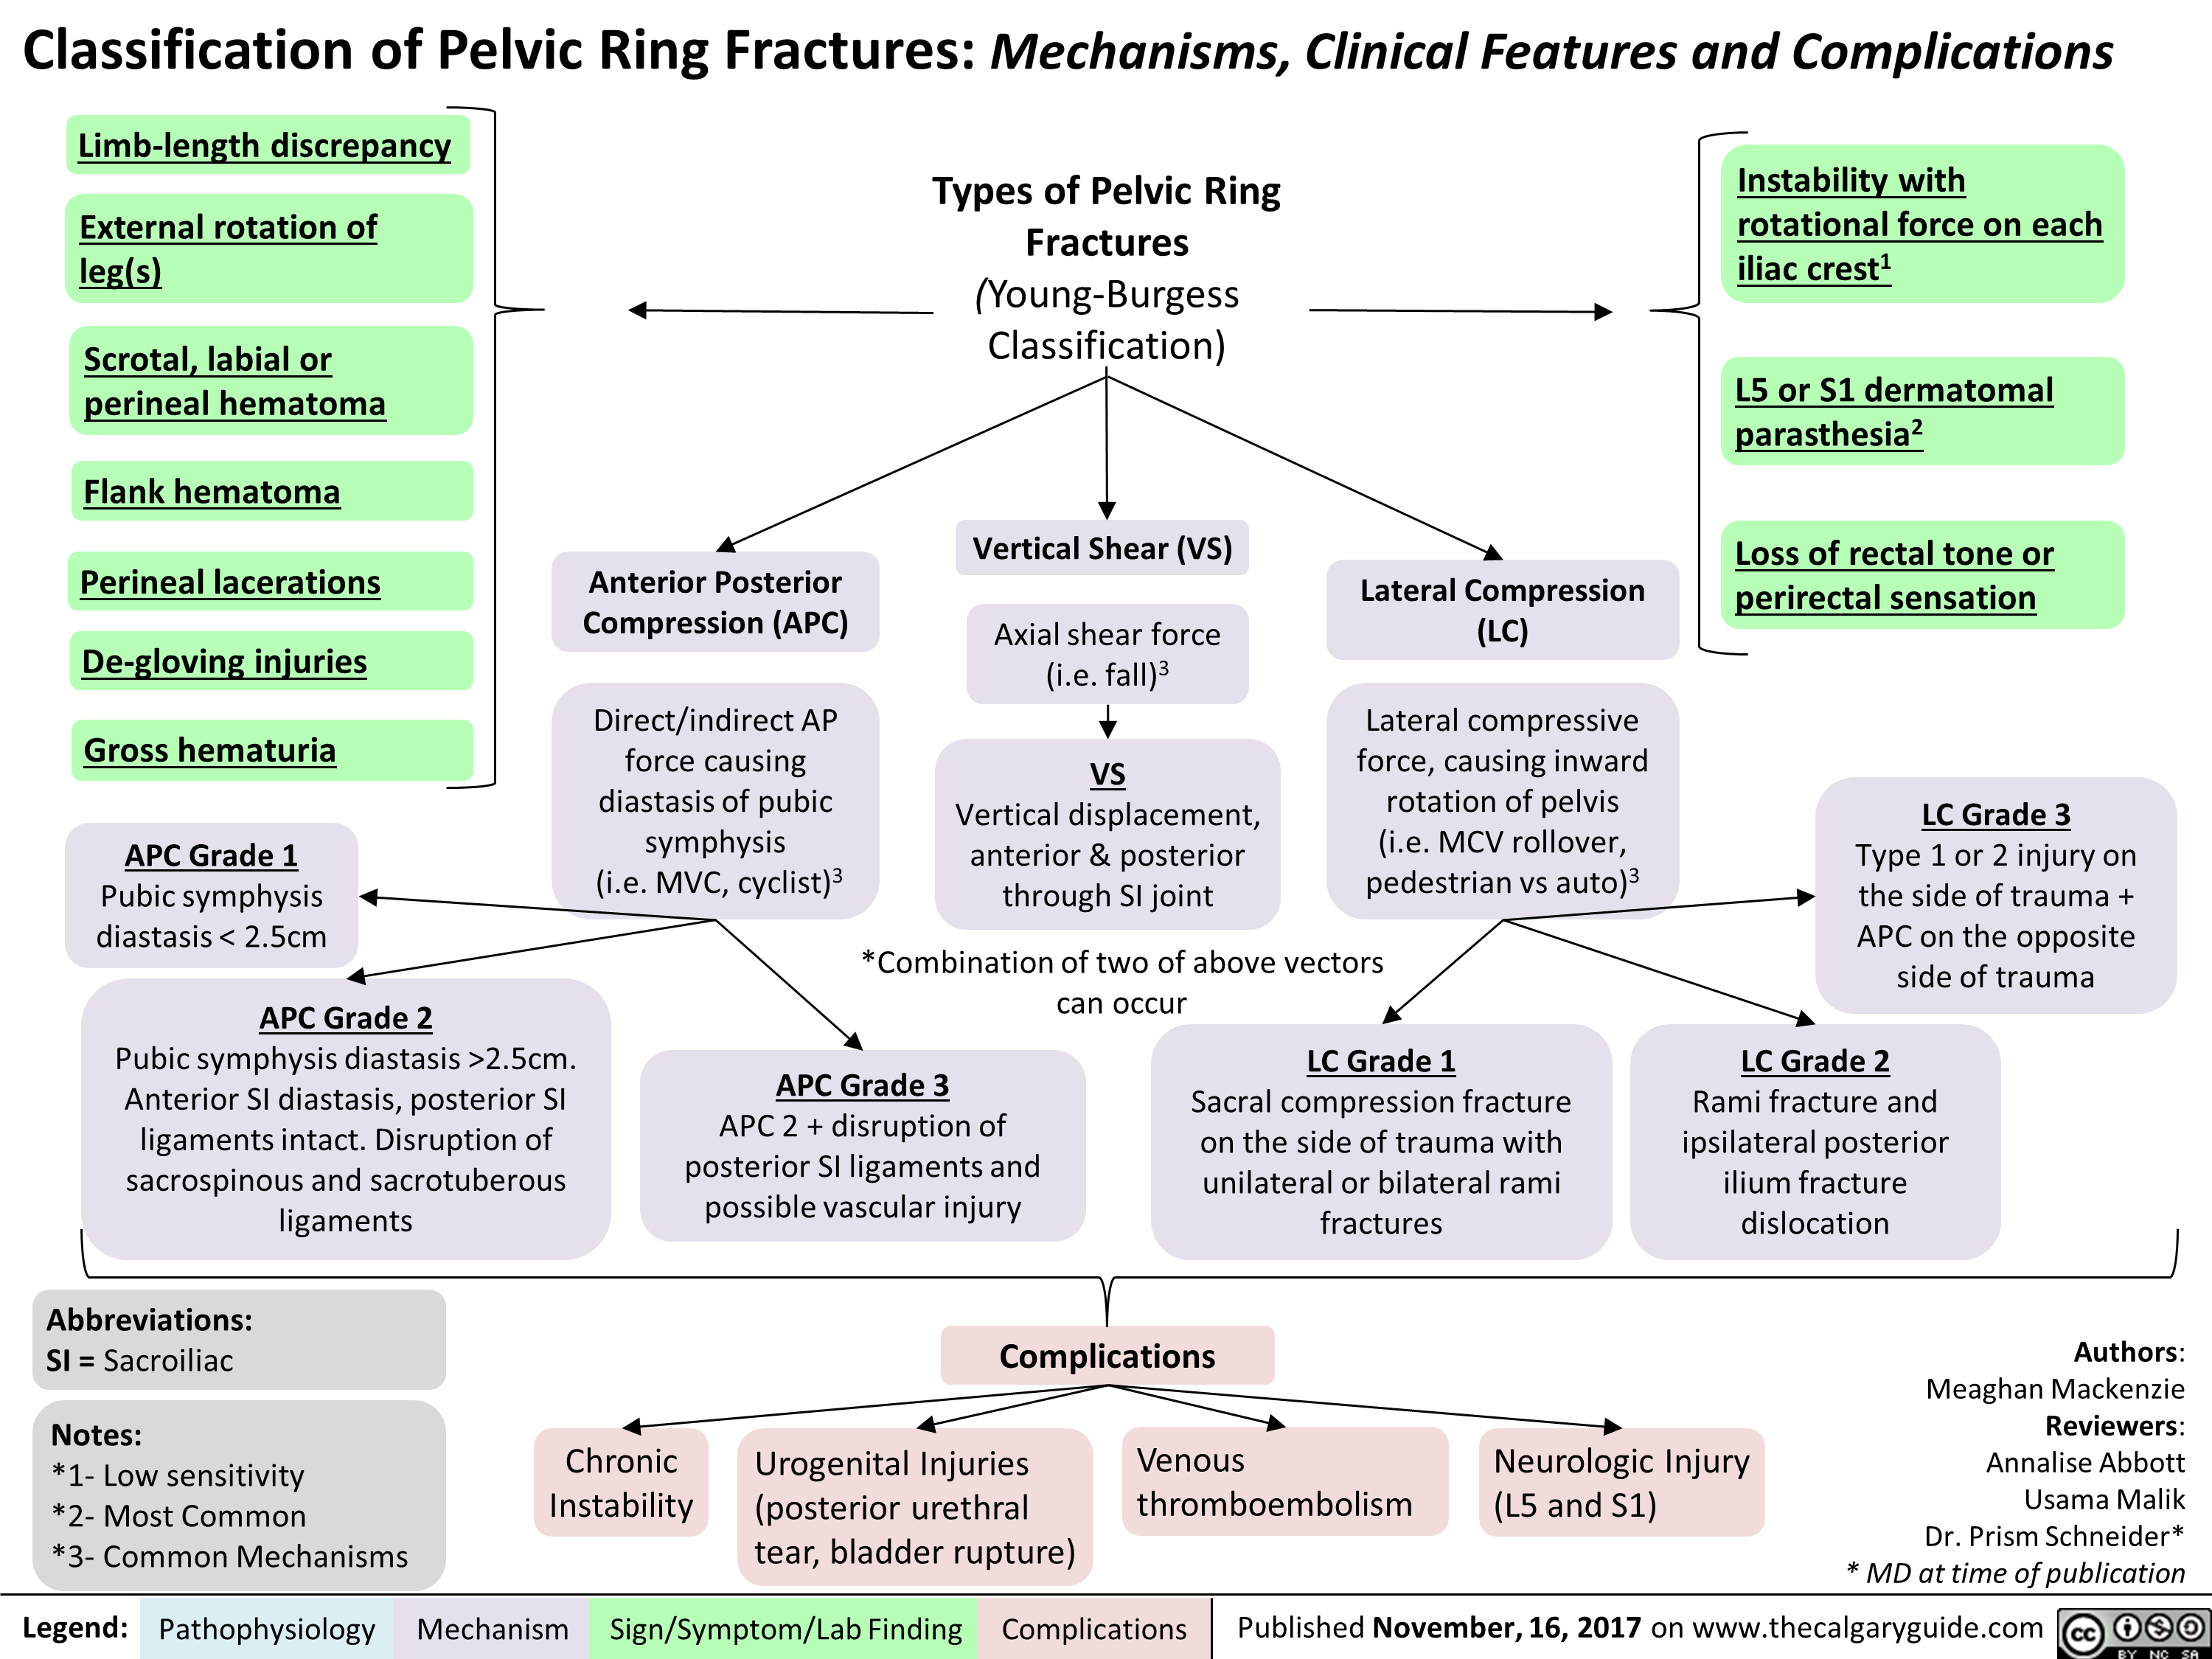 Classification of Pelvic Ring Fractures: Mechanisms, Clinical Features and Complications 
Limb-length discrepancy >2.5cm. SI of Types of Pelvic Fractures (Young-Burgess Classification) Ring • Instability with External rotation of rotational force on each leg(s) iliac crest' • vectors LC Scrotal, labial or 15 or S1 dermatomal perinea! hematoma  parasthesia2  Flank hematoma  Vertical Shear (VS) Axial shear force (i.e. fall)3 Loss of rectal tone or Perinea! lacerations Anterior Posterior Compression (APC) Lateral Compression (LC) perirectal sensation De-gloving injuries  Direct/indirect AP force causing diastasis of pubic symphysis (i.e. MVC, cyclist)3 *Combination APC Grade Lateral compressive force, causing inward rotation of pelvis (i.e. MCV rollover, pedestrian vs auto)3 Grade 1 Rami ipsilateral LC Grade • Gross hematuria  VS Vertical displacement, anterior & posterior through SI joint APC Grade 1 LC Grade 3 Type 1 or 2 injury on the side of trauma + APC on the opposite side of trauma Pubic symphysis diastasis < 2.5cm APC Grade 2 of two can 3 of above occur Sacral on the unilateral 2 Pubic symphysis diastasis Anterior SI diastasis, posterior ligaments intact. Disruption sacrospinous and sacrotuberous ligaments compression fracture side of trauma with or bilateral rami fractures fracture and posterior ilium fracture dislocation APC 2 + disruption of posterior SI ligaments and possible vascular injury 
Abbreviations: SI = Sacroiliac Notes: *1- Low sensitivity *2- Most Common *3- Common Mechanisms Authors: Meaghan Mackenzie Reviewers: Annalise Abbott Usama Malik Dr. Prism Schneider* * MD at time of publication Complications Chronic  Instability Urogenital Injuries (posterior urethral tear, bladder rupture) NW. Venous thromboembolism Neurologic Injury (L5 and S1) 